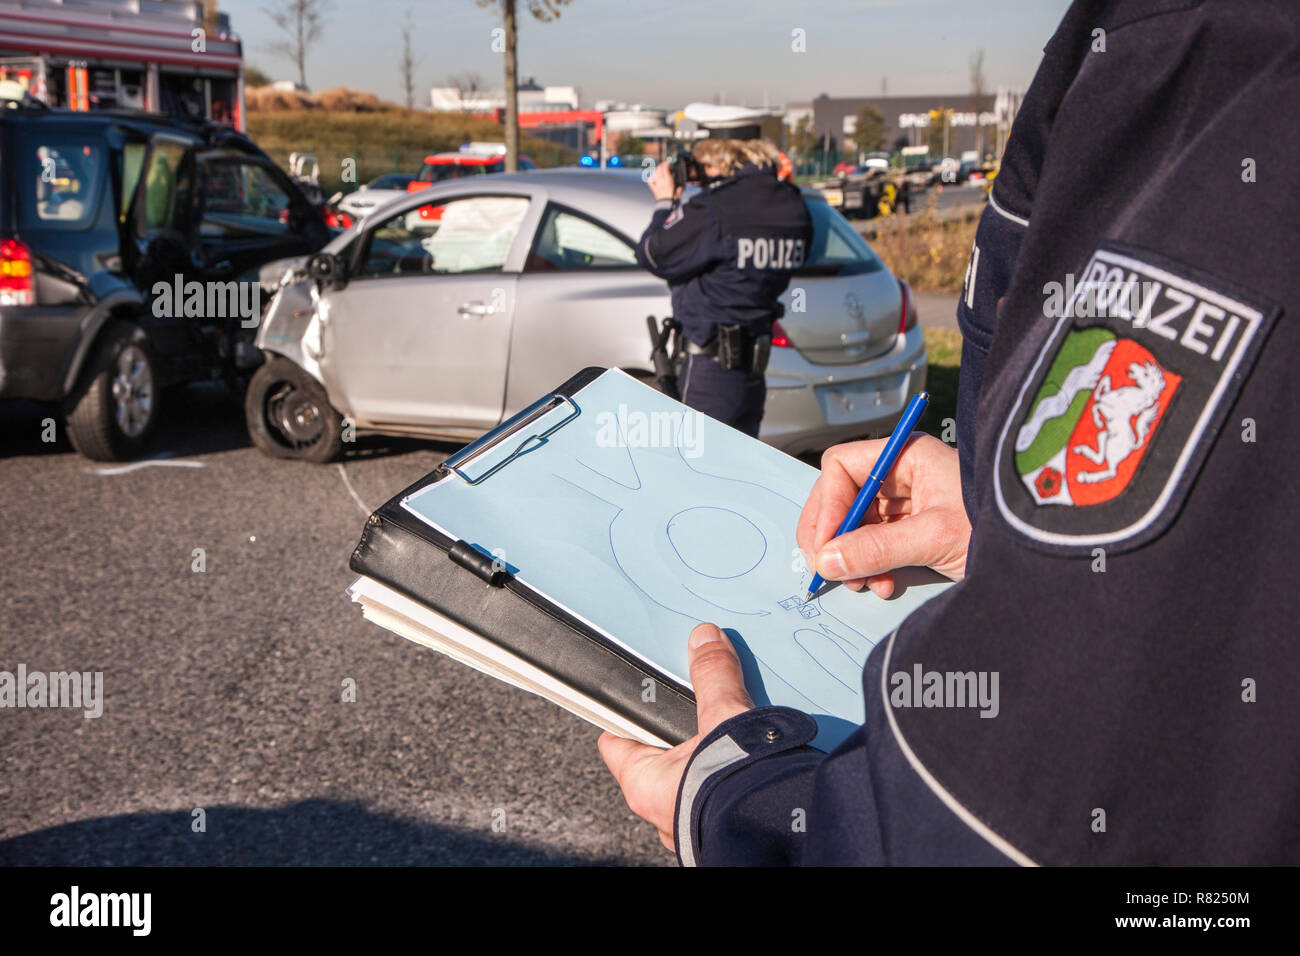 Police officer sketching the accident scene, Germany Stock Photo